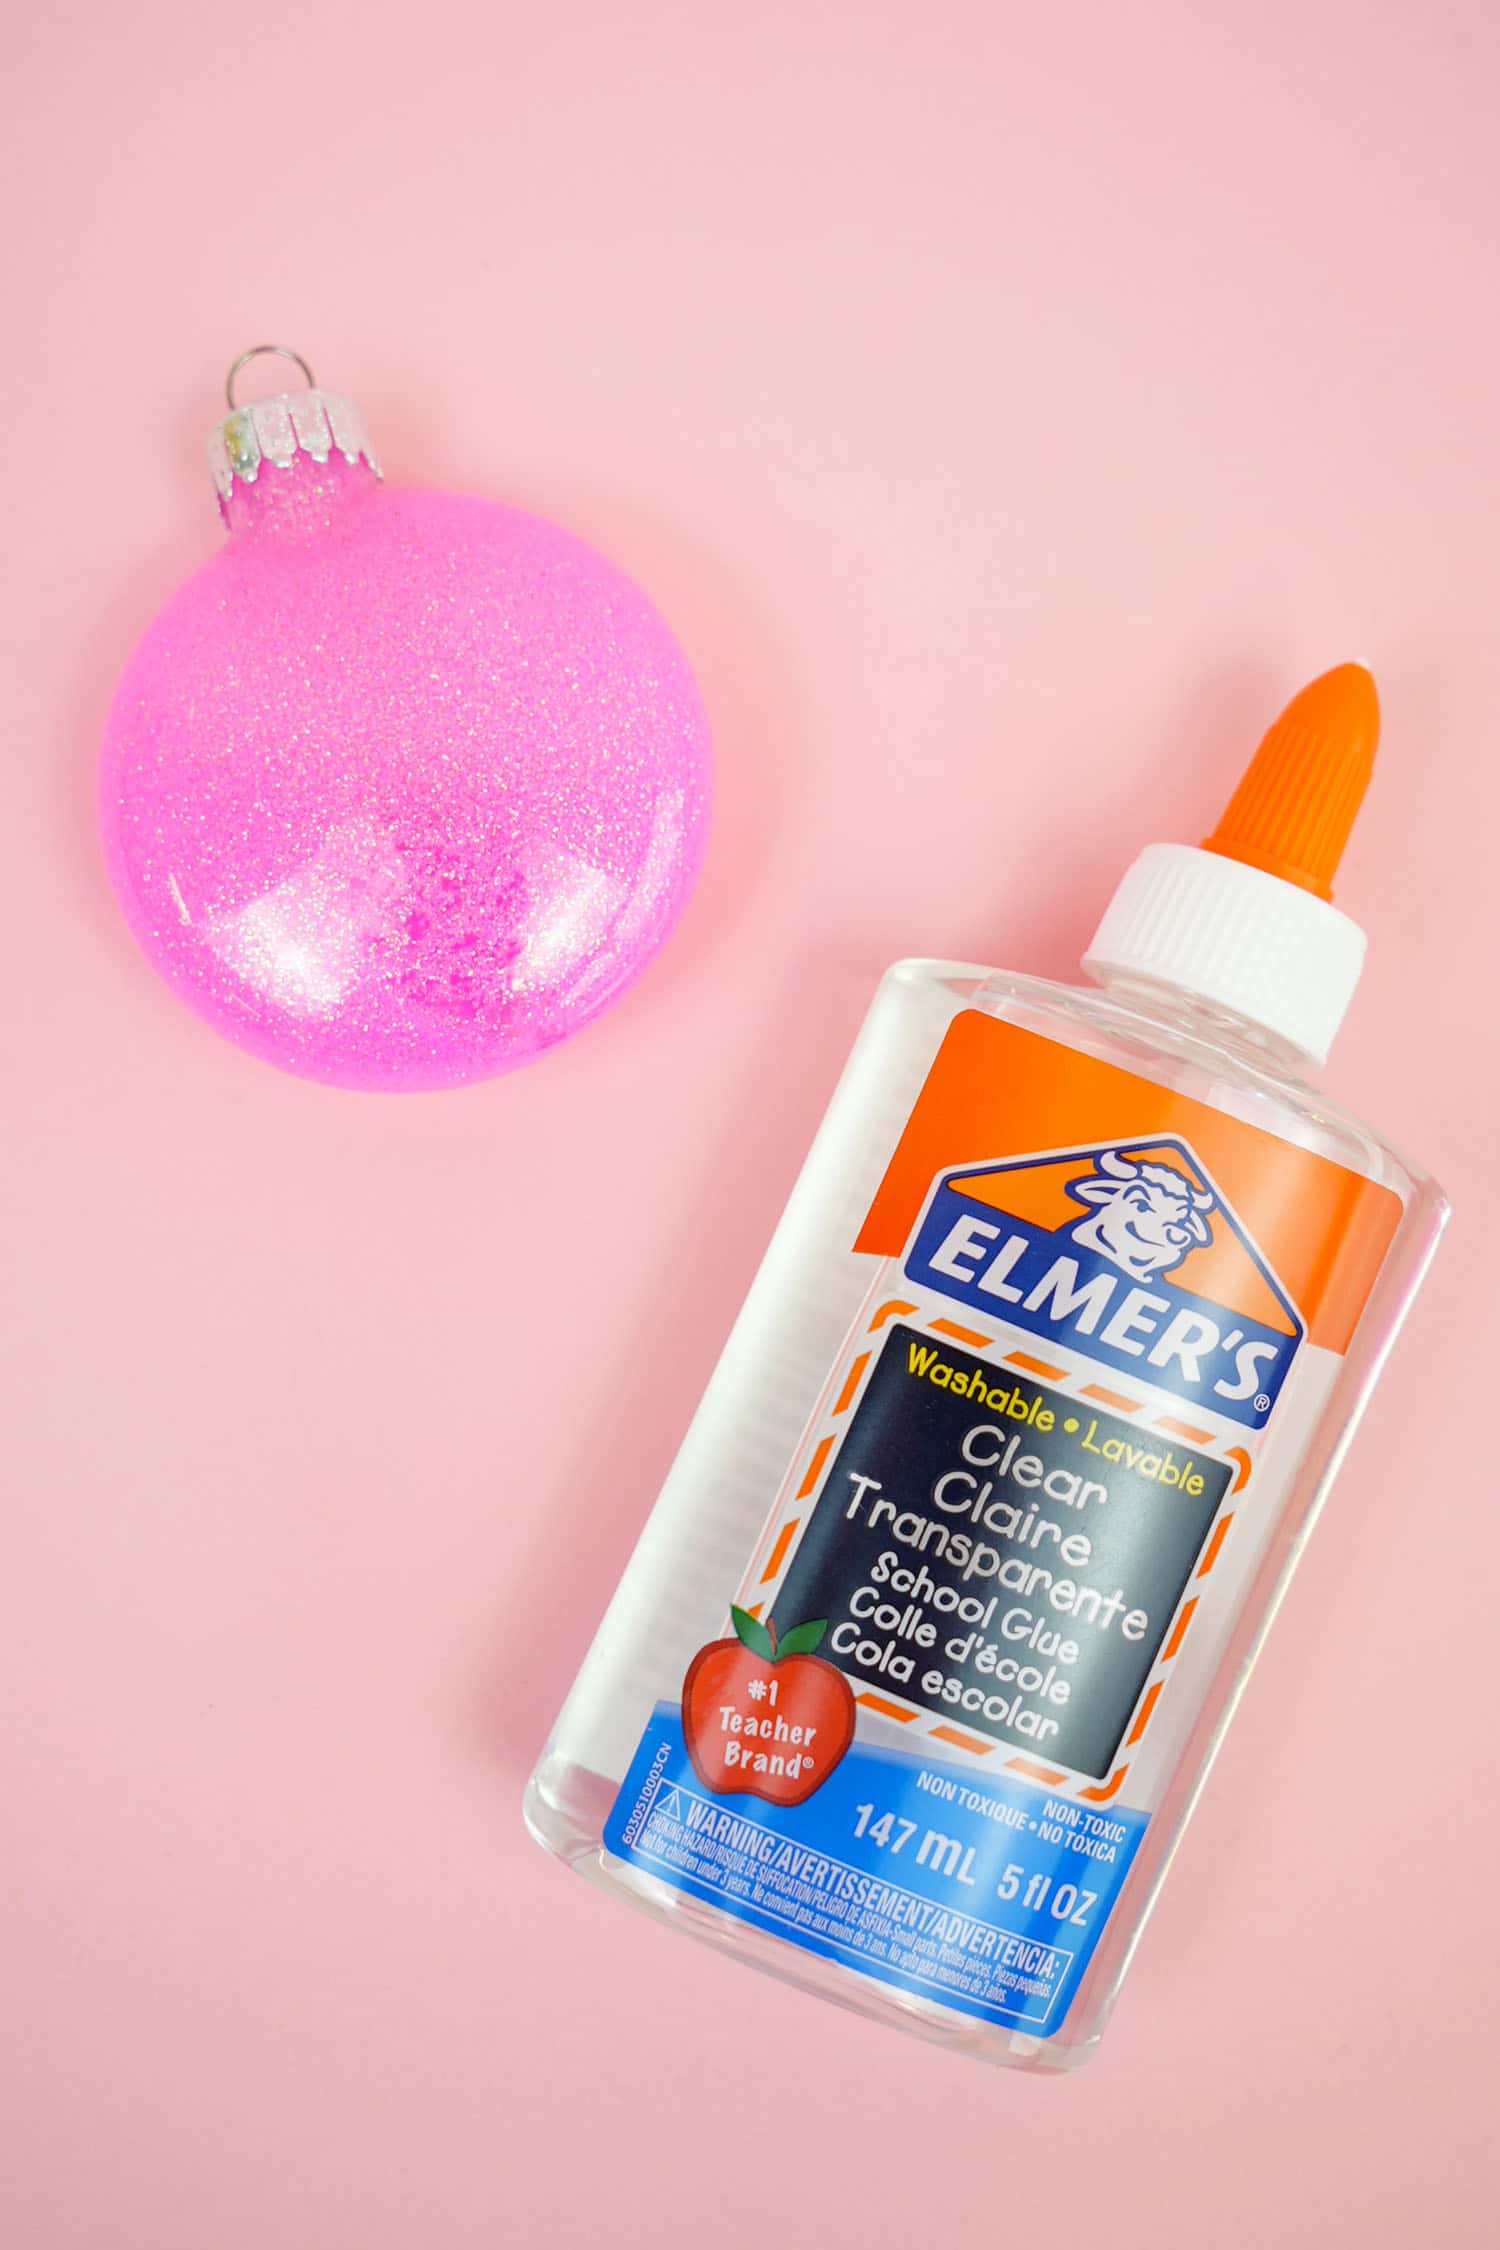 glitter ornaments are sitting on a pink surface with glue